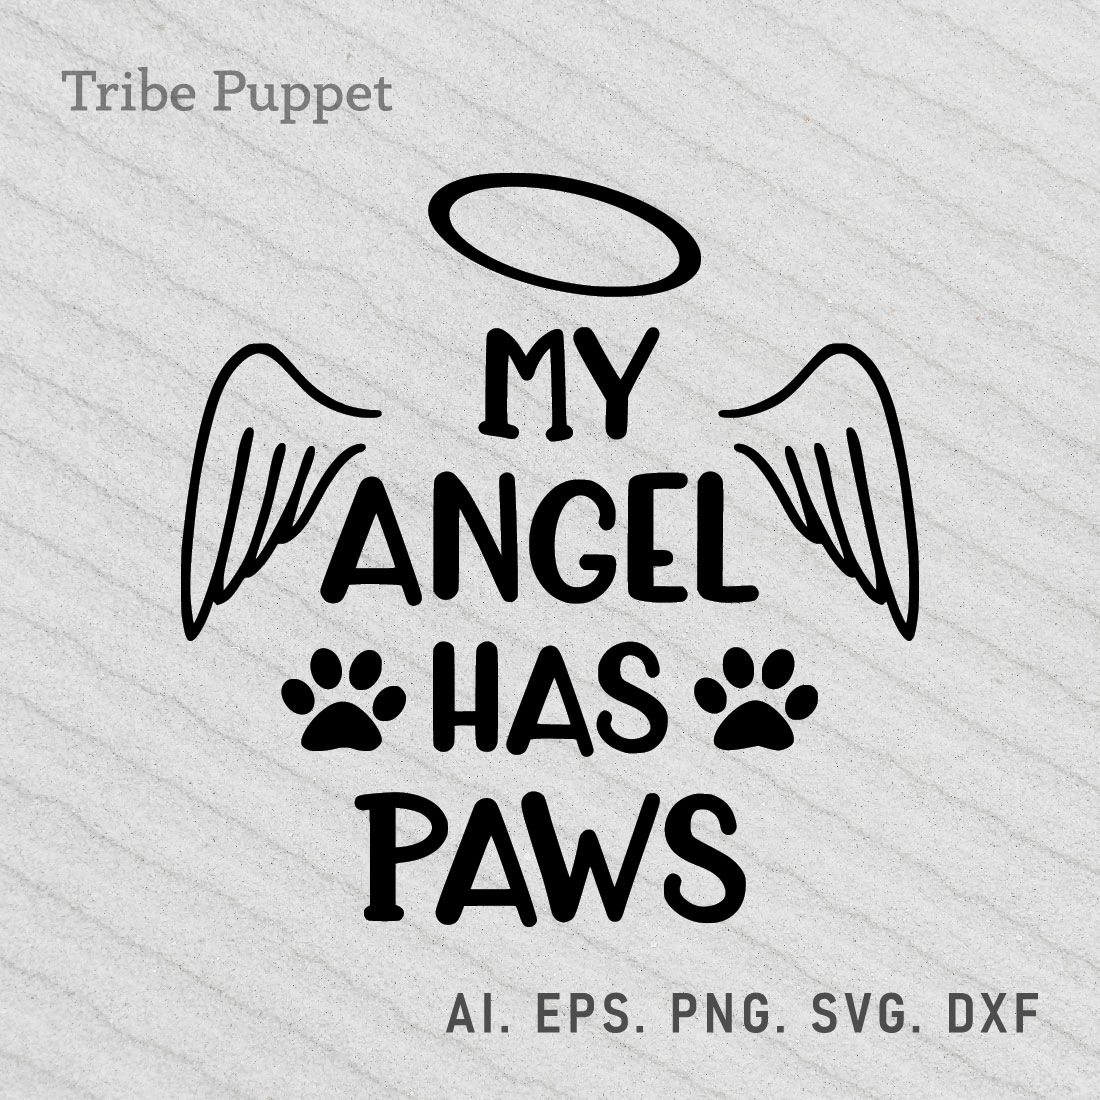 Angel has paws svg file.